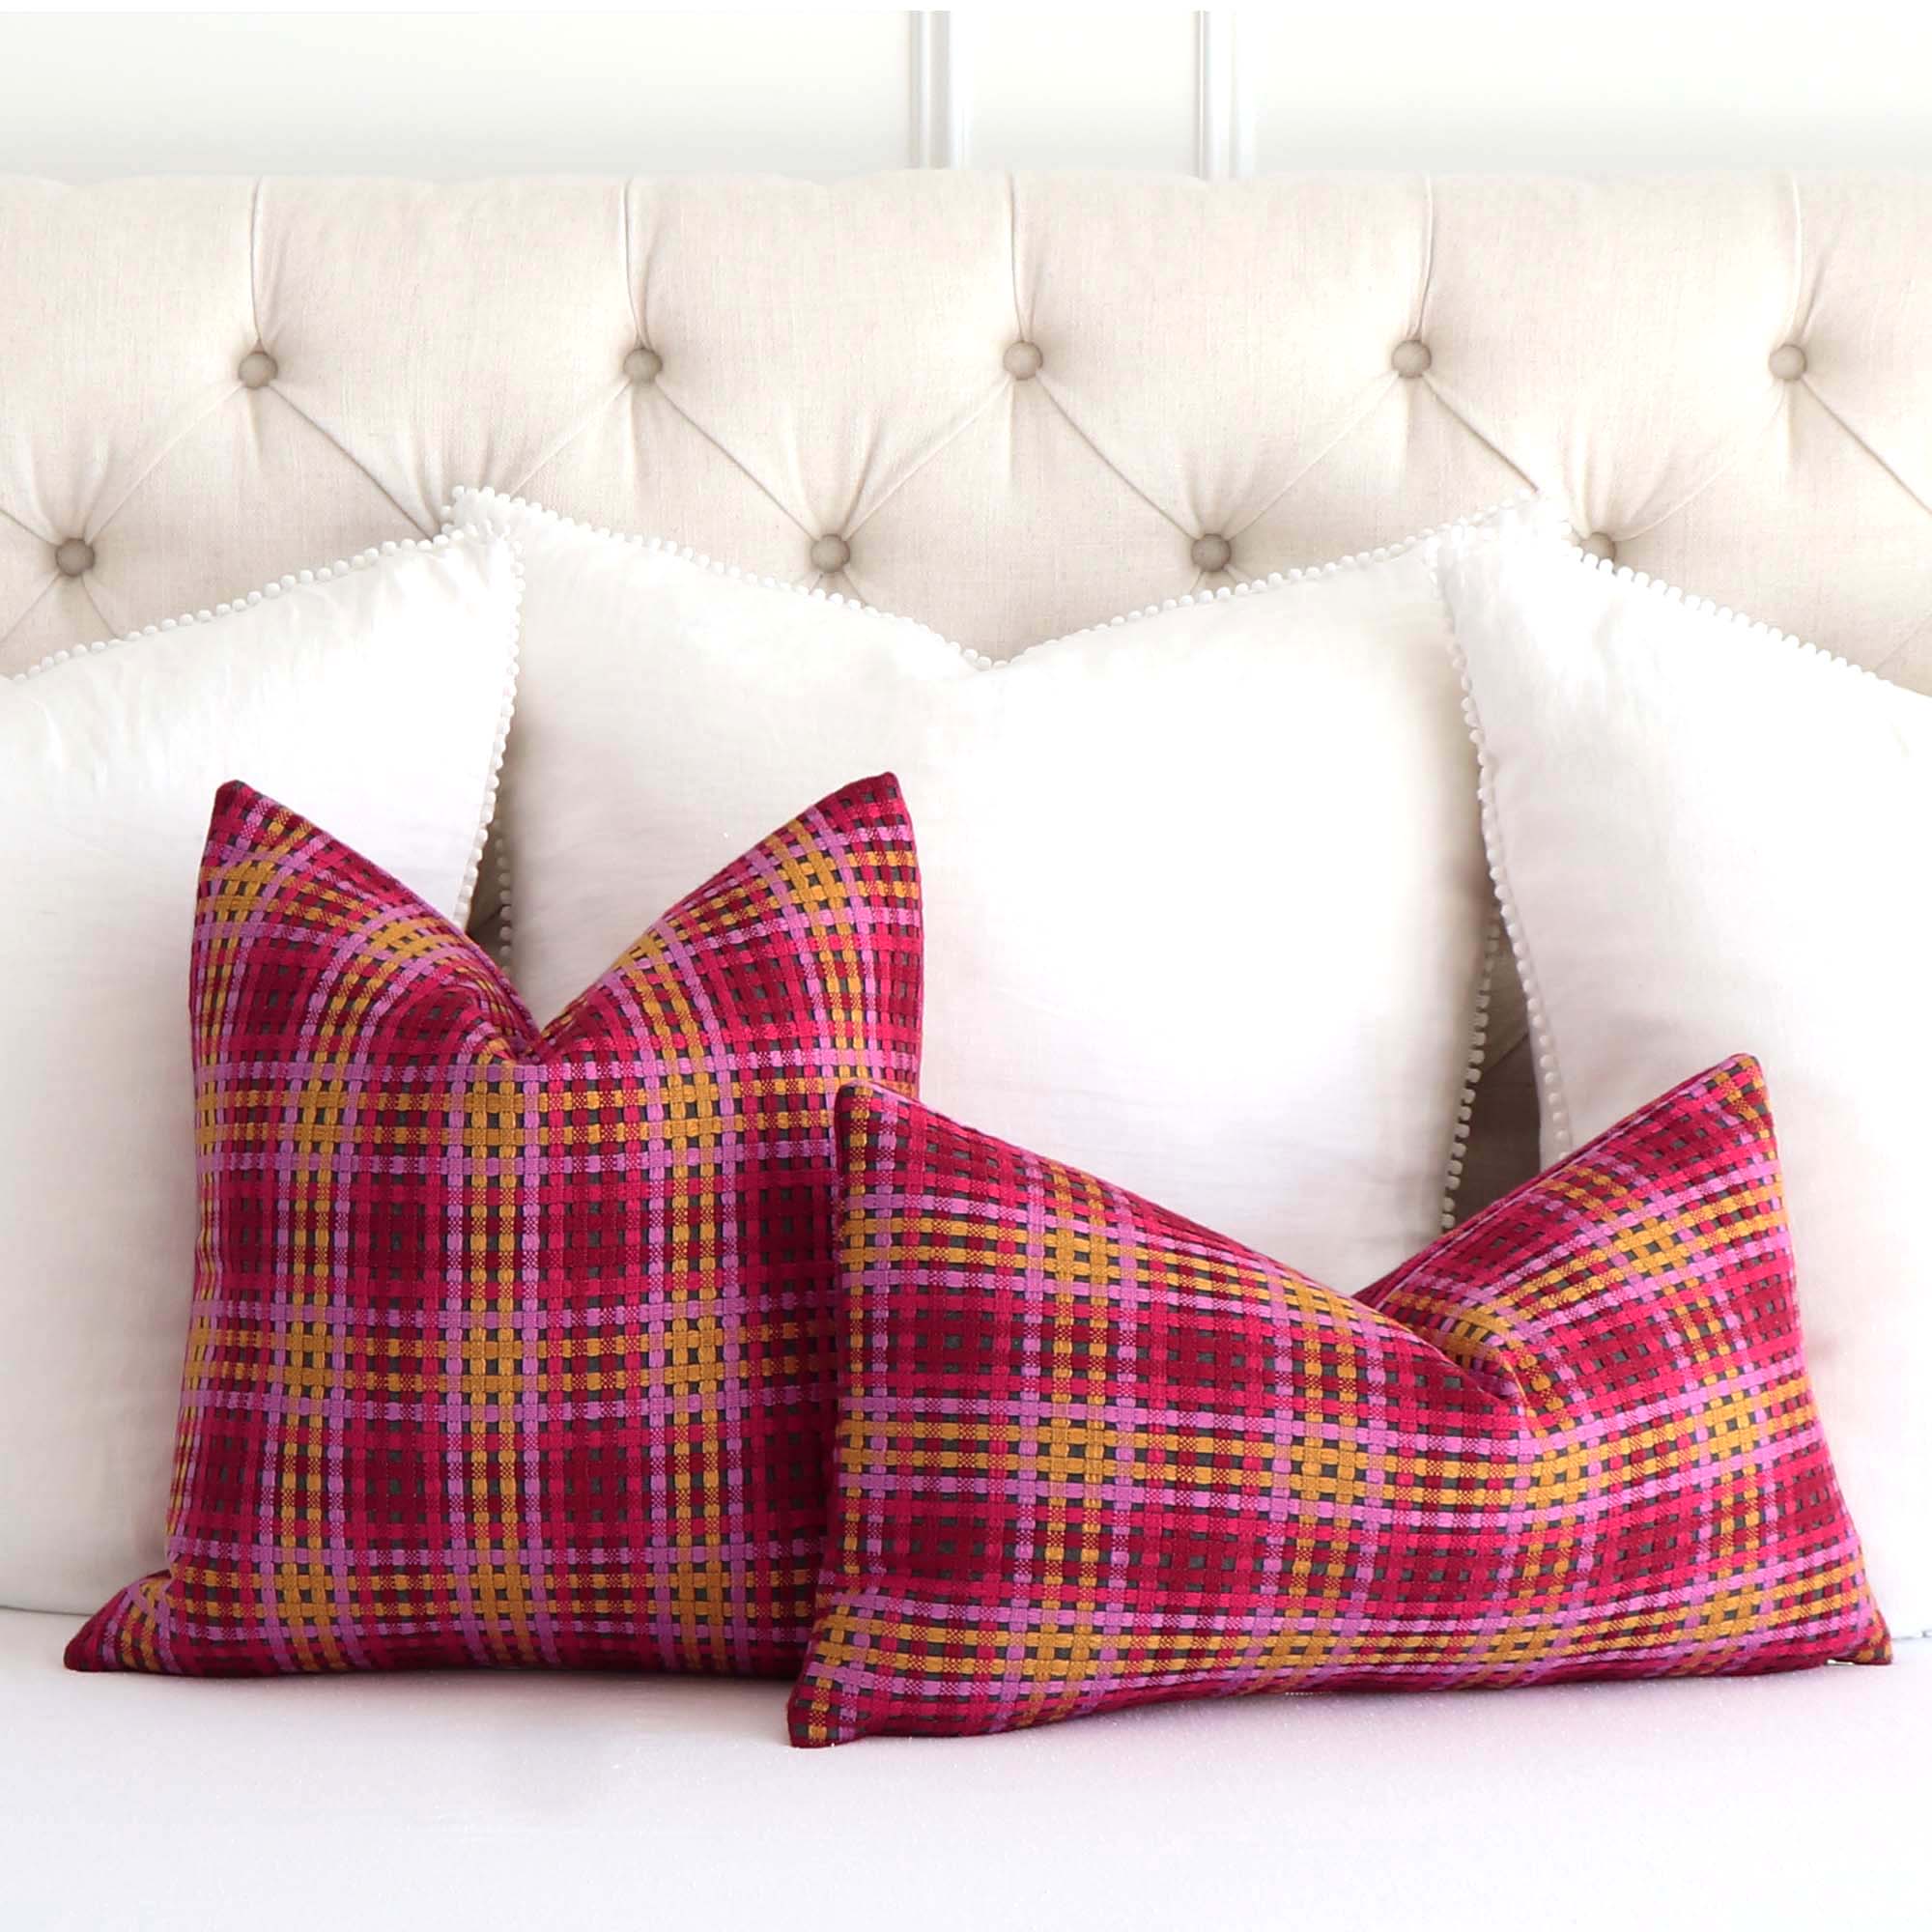 Scalamandre Twiggy Cherry Blossom Pink Red Yellow Checkered Striped Woven Gradient Designer Luxury Throw Pillow Cover on Bed with Big White Euro Shams